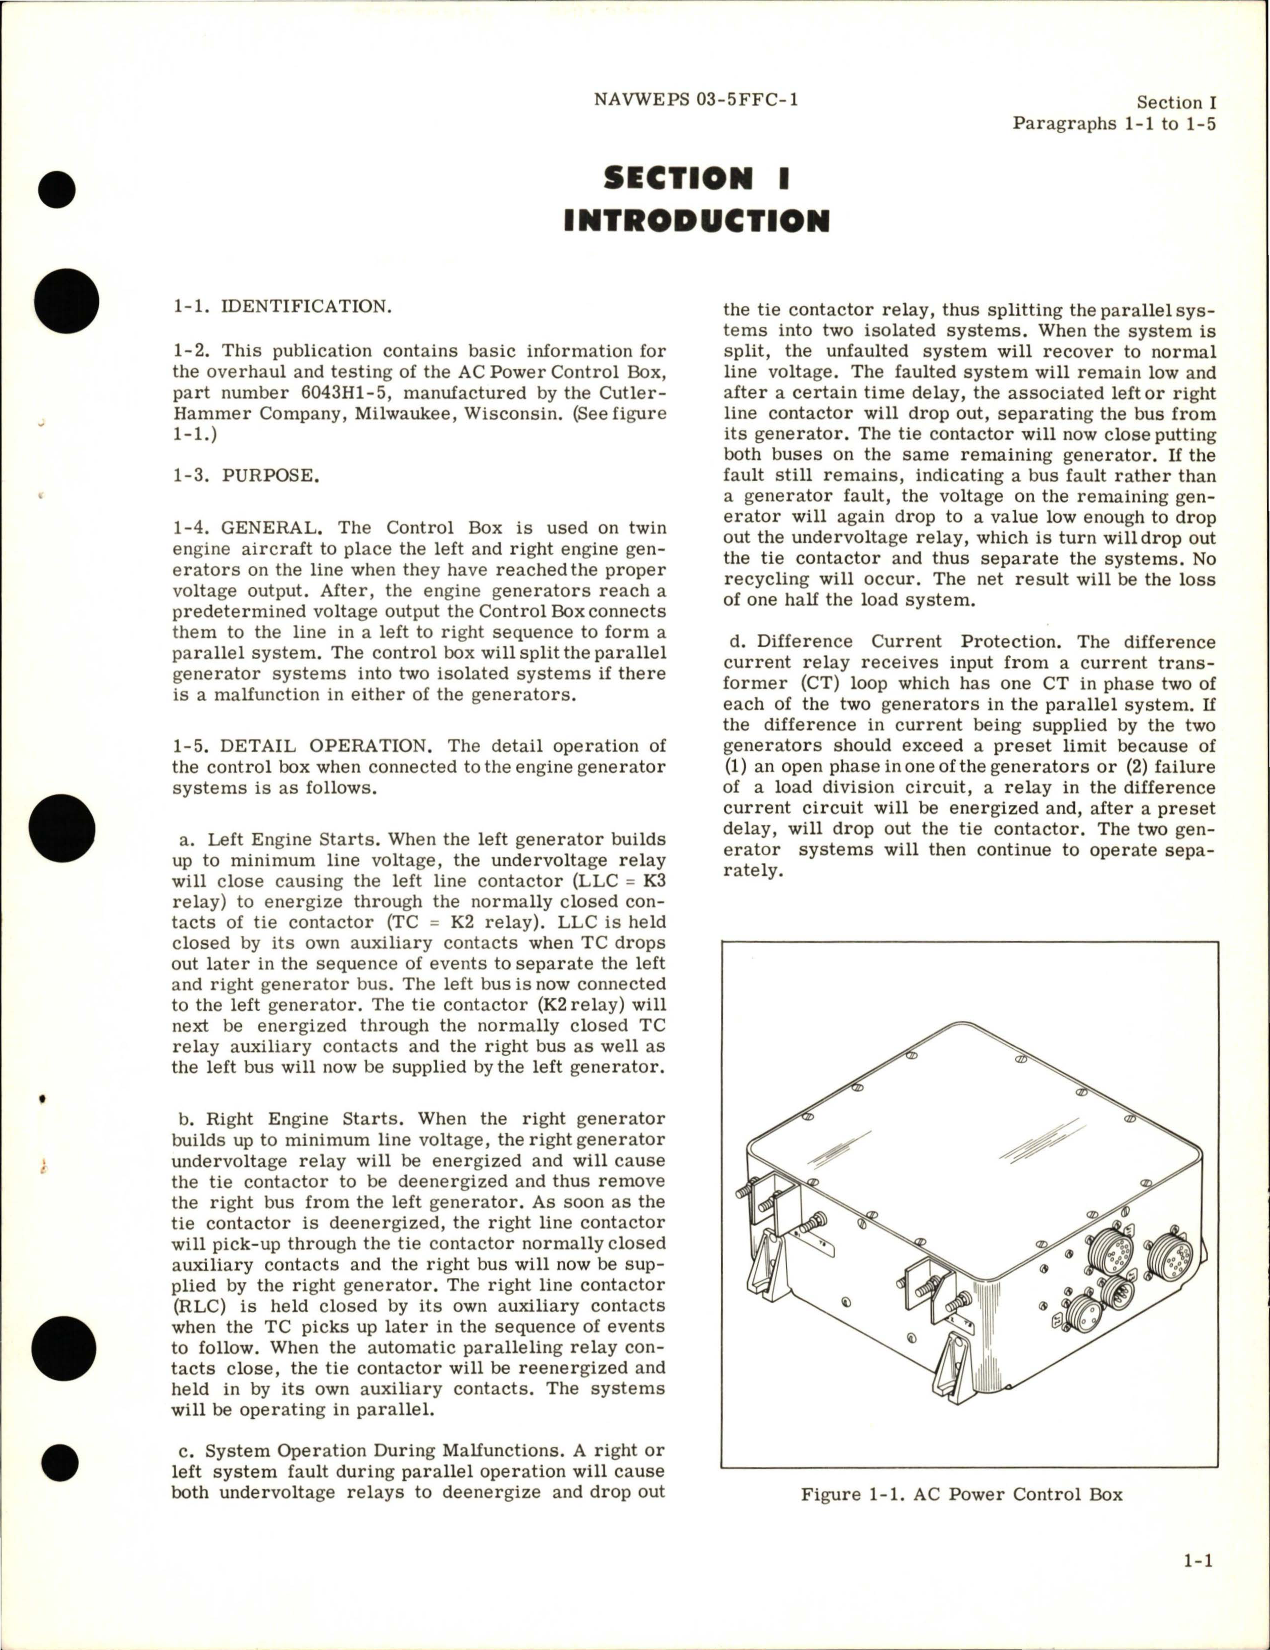 Sample page 5 from AirCorps Library document: Overhaul Instructions for AC Power Control Box - Part 6043H1-5 